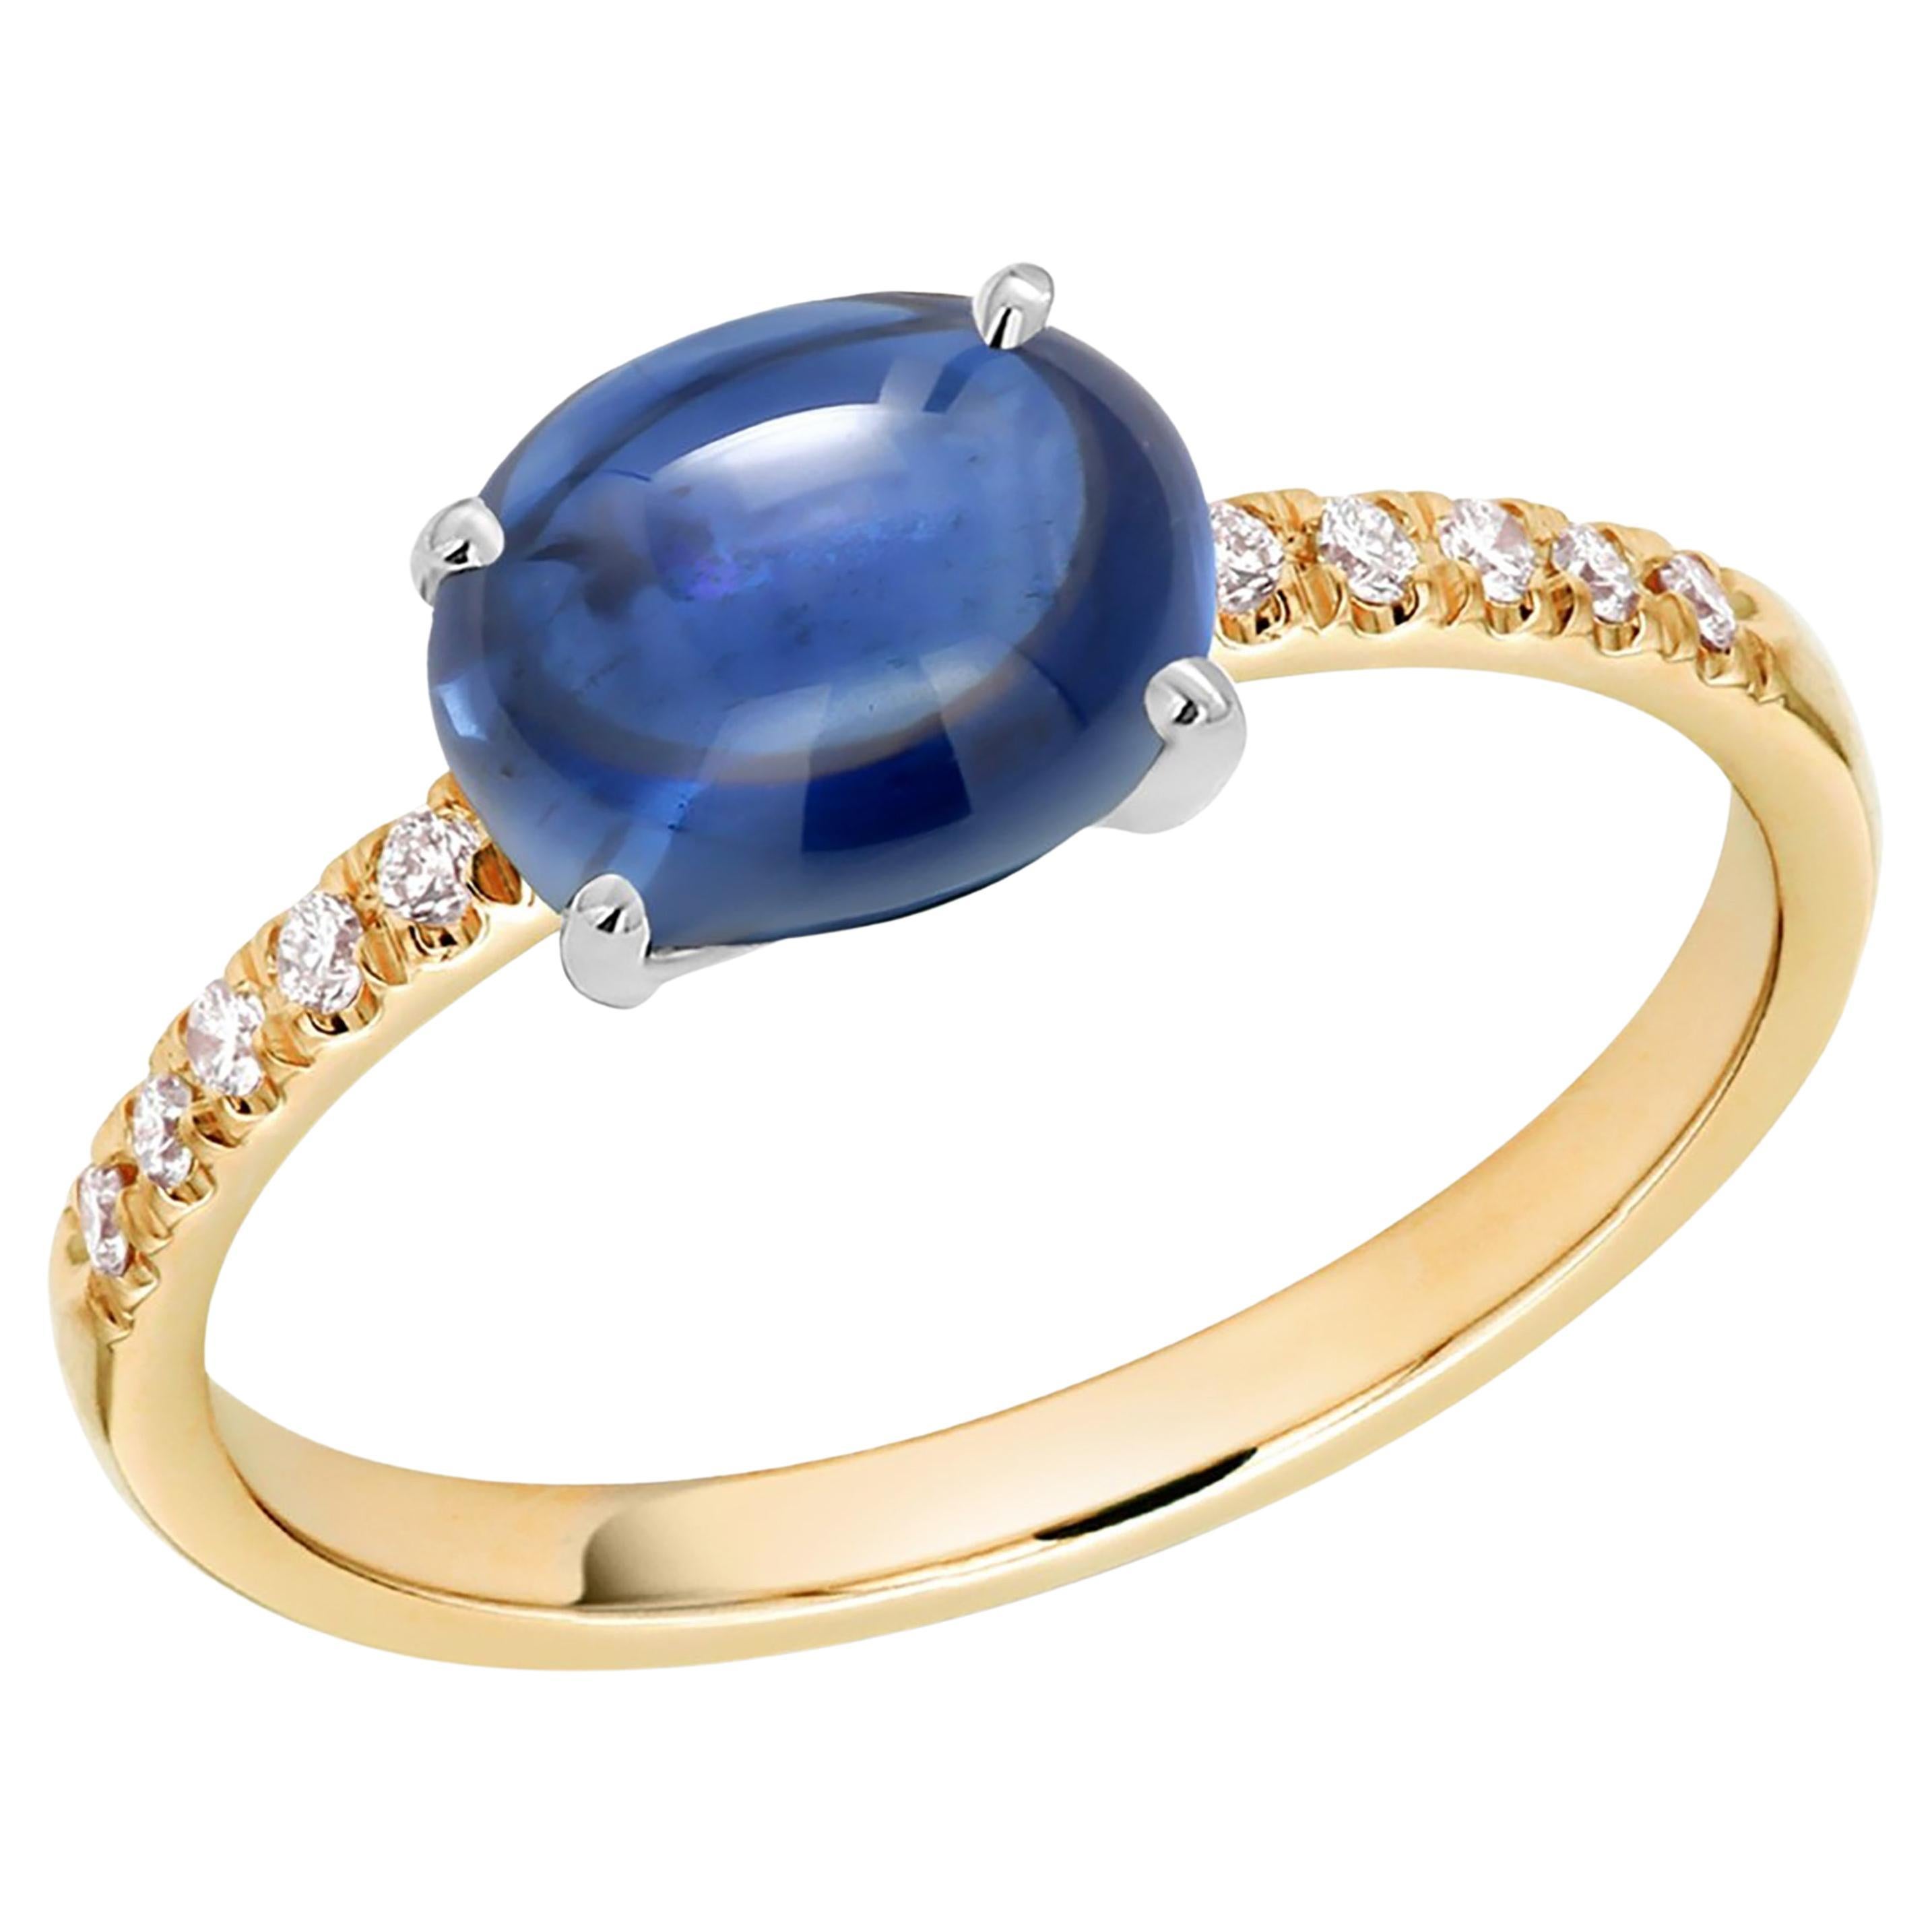 Ceylon Cabochon Sapphire Diamond Yellow and White Gold Cocktail Ring